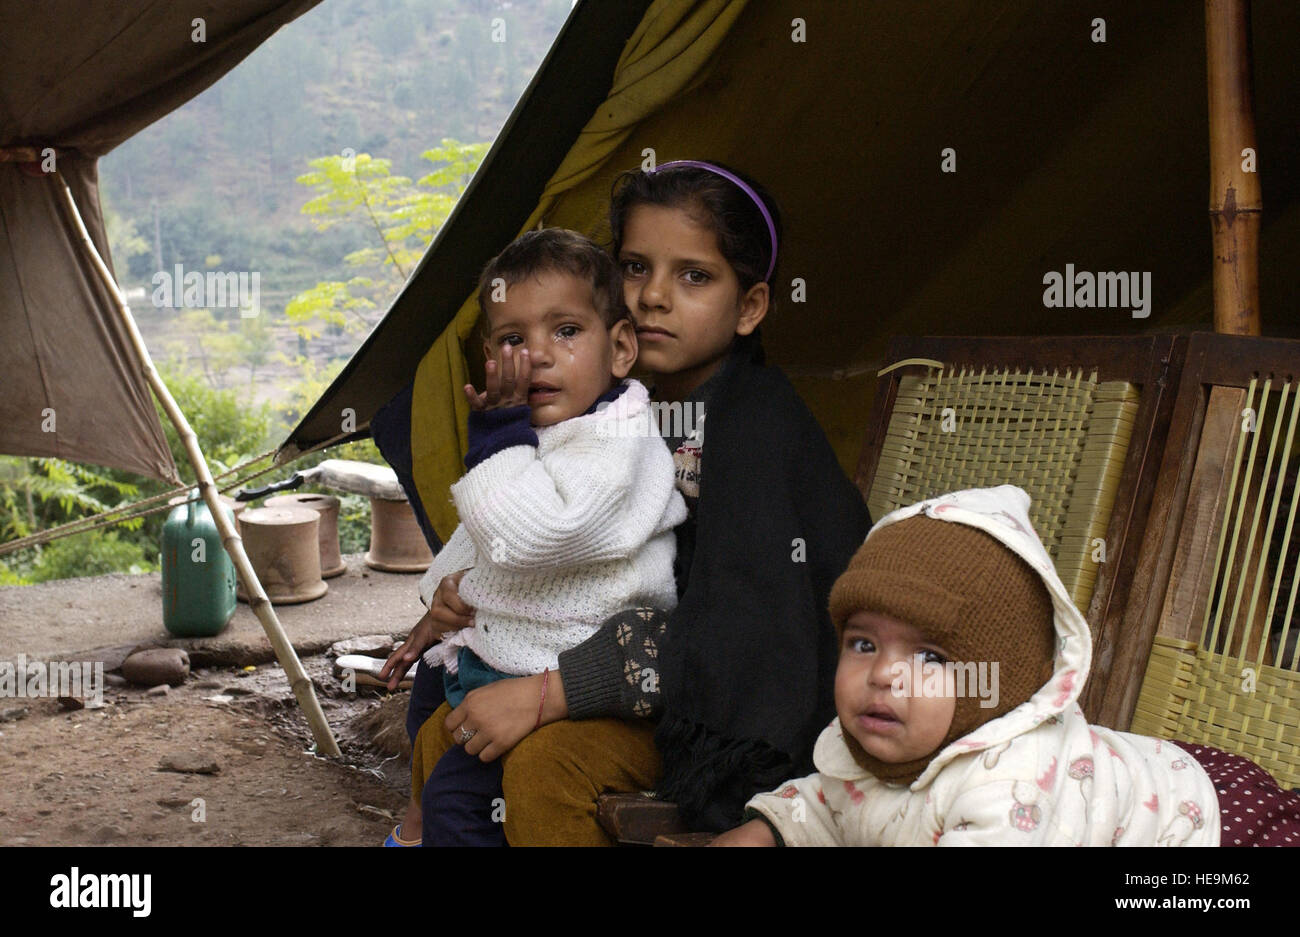 Young earthquake survivors live in a tent after their house was destroyed at Muzaffarabad, Pakistan, Nov. 11, 2005. The U.S. government is participating in a multinational humanitarian assistance and support effort lead by the Pakistani government to bring aid to victims of the devastating earthquake that struck the region Oct. 8, 2005.   Airman 1st Class Barry Loo Stock Photo